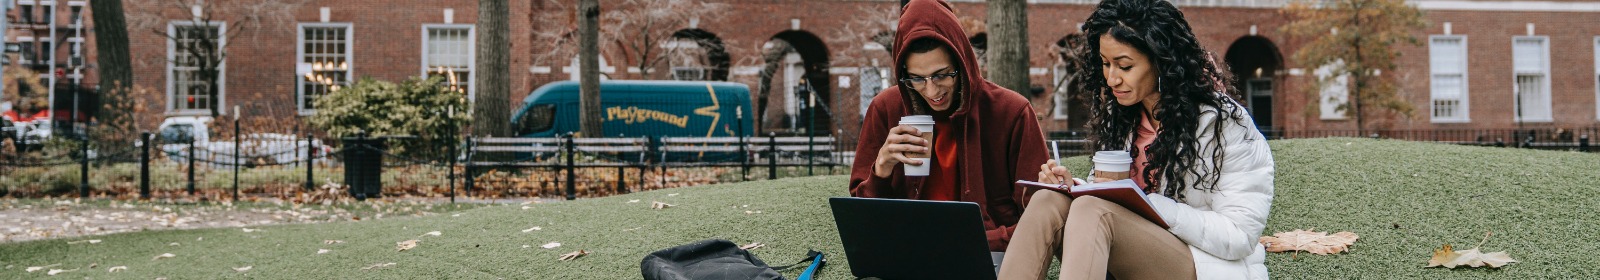 college students studying on lawn